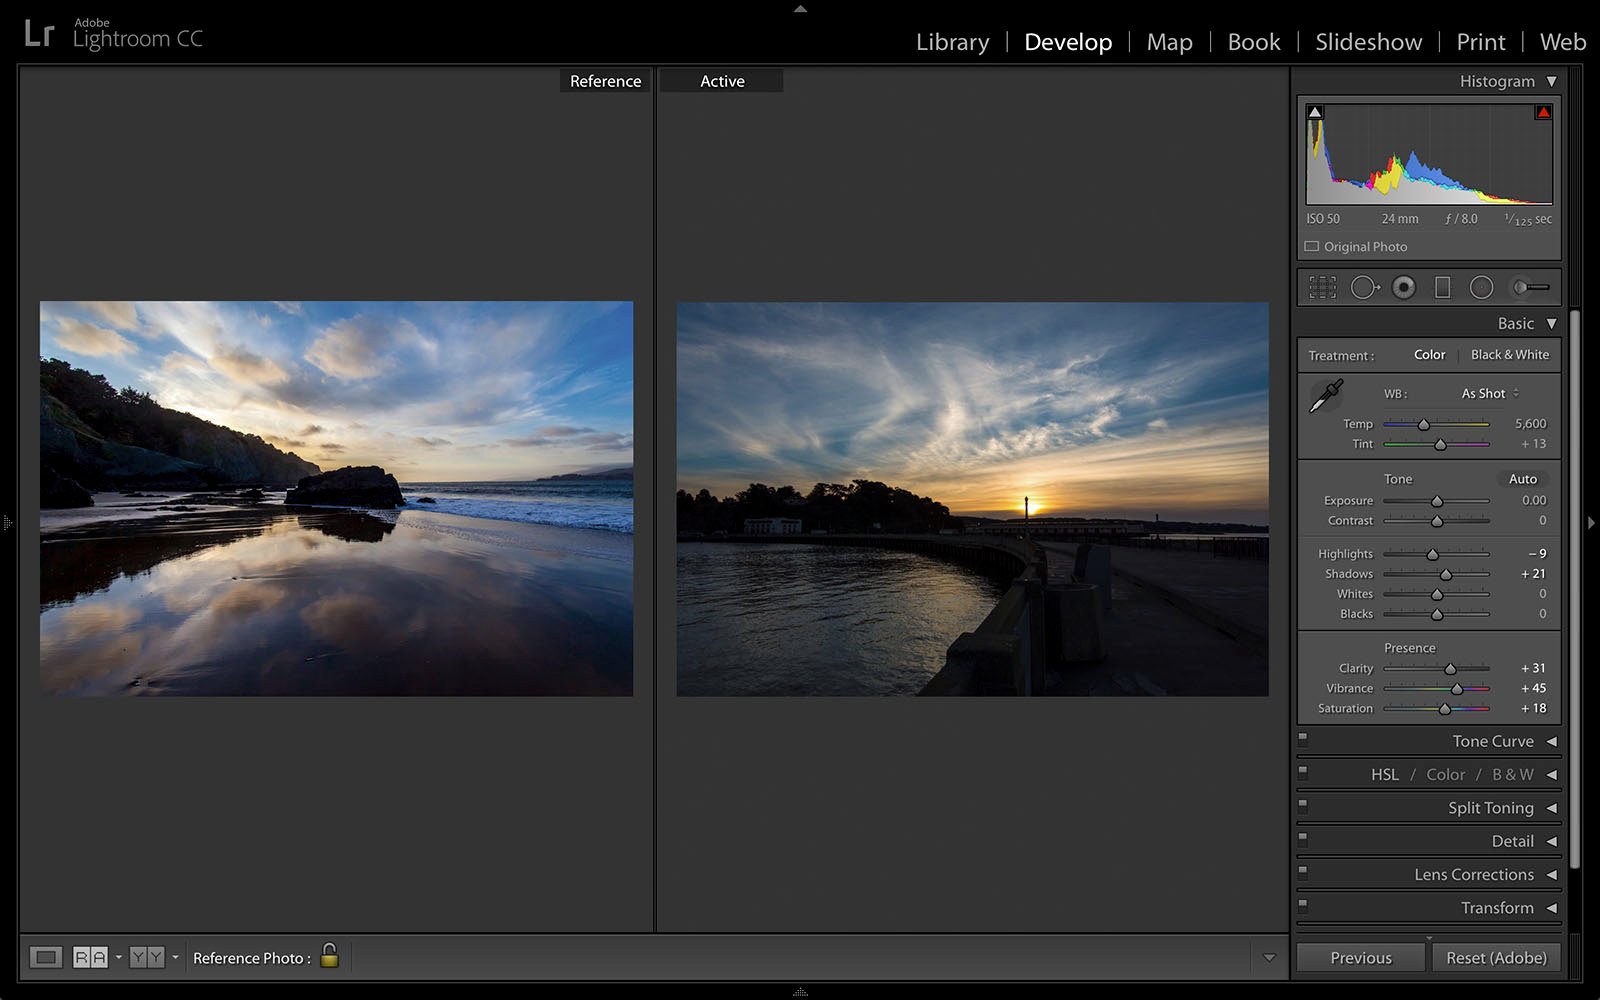 Lightroom Gets New Reference View for Comparing Photos as You Edit